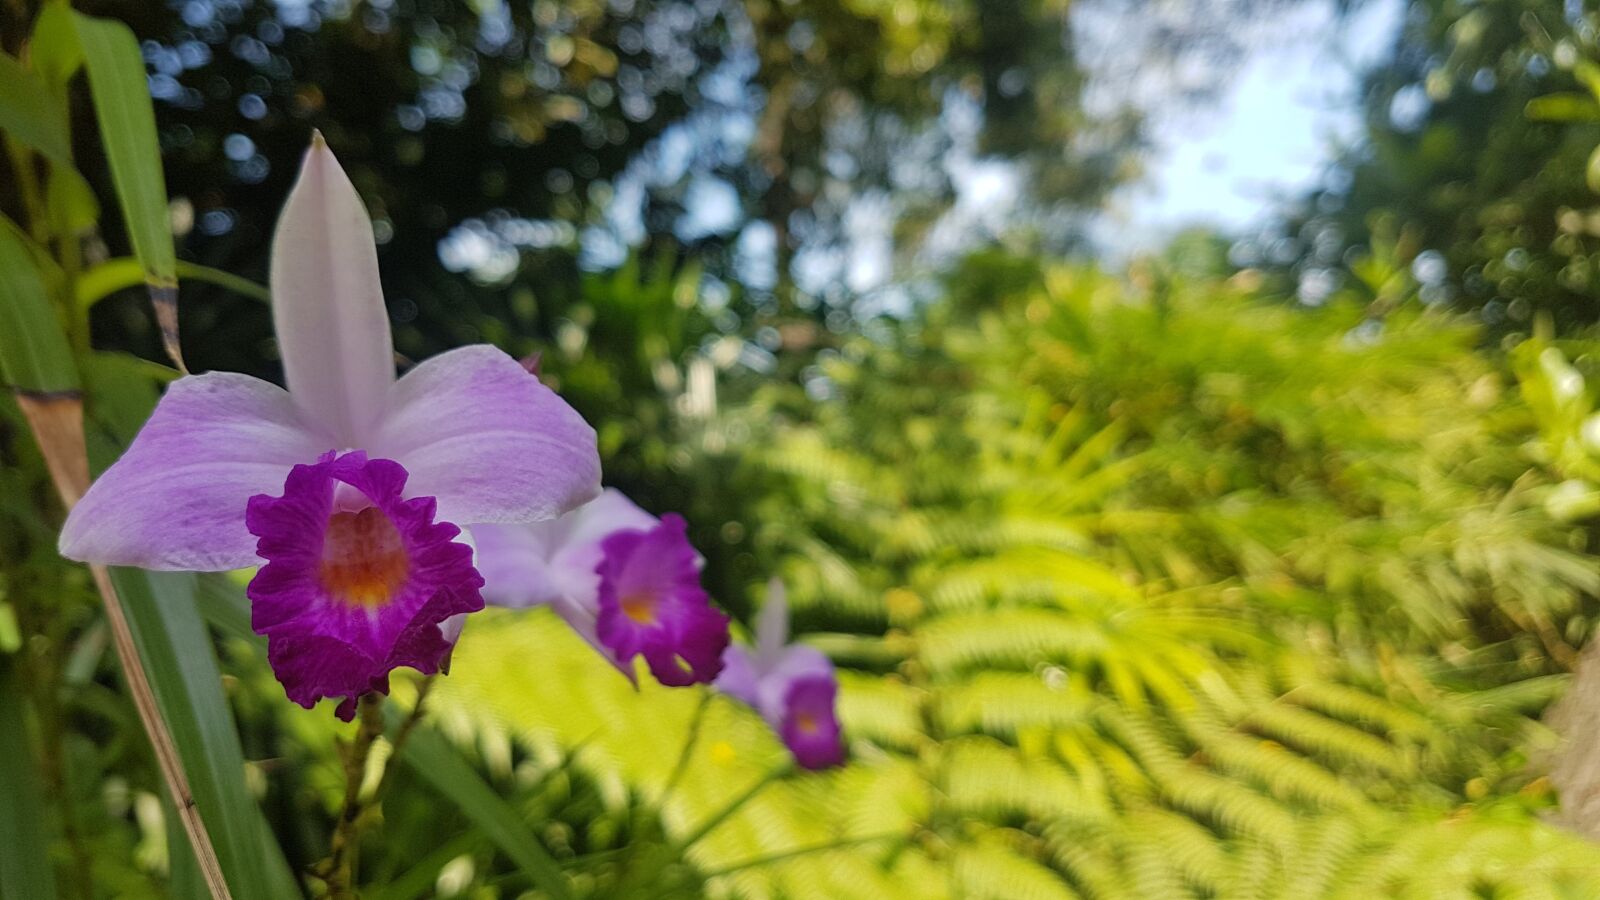 Samsung Galaxy S7 sample photo. Orchids, flower, nature photography